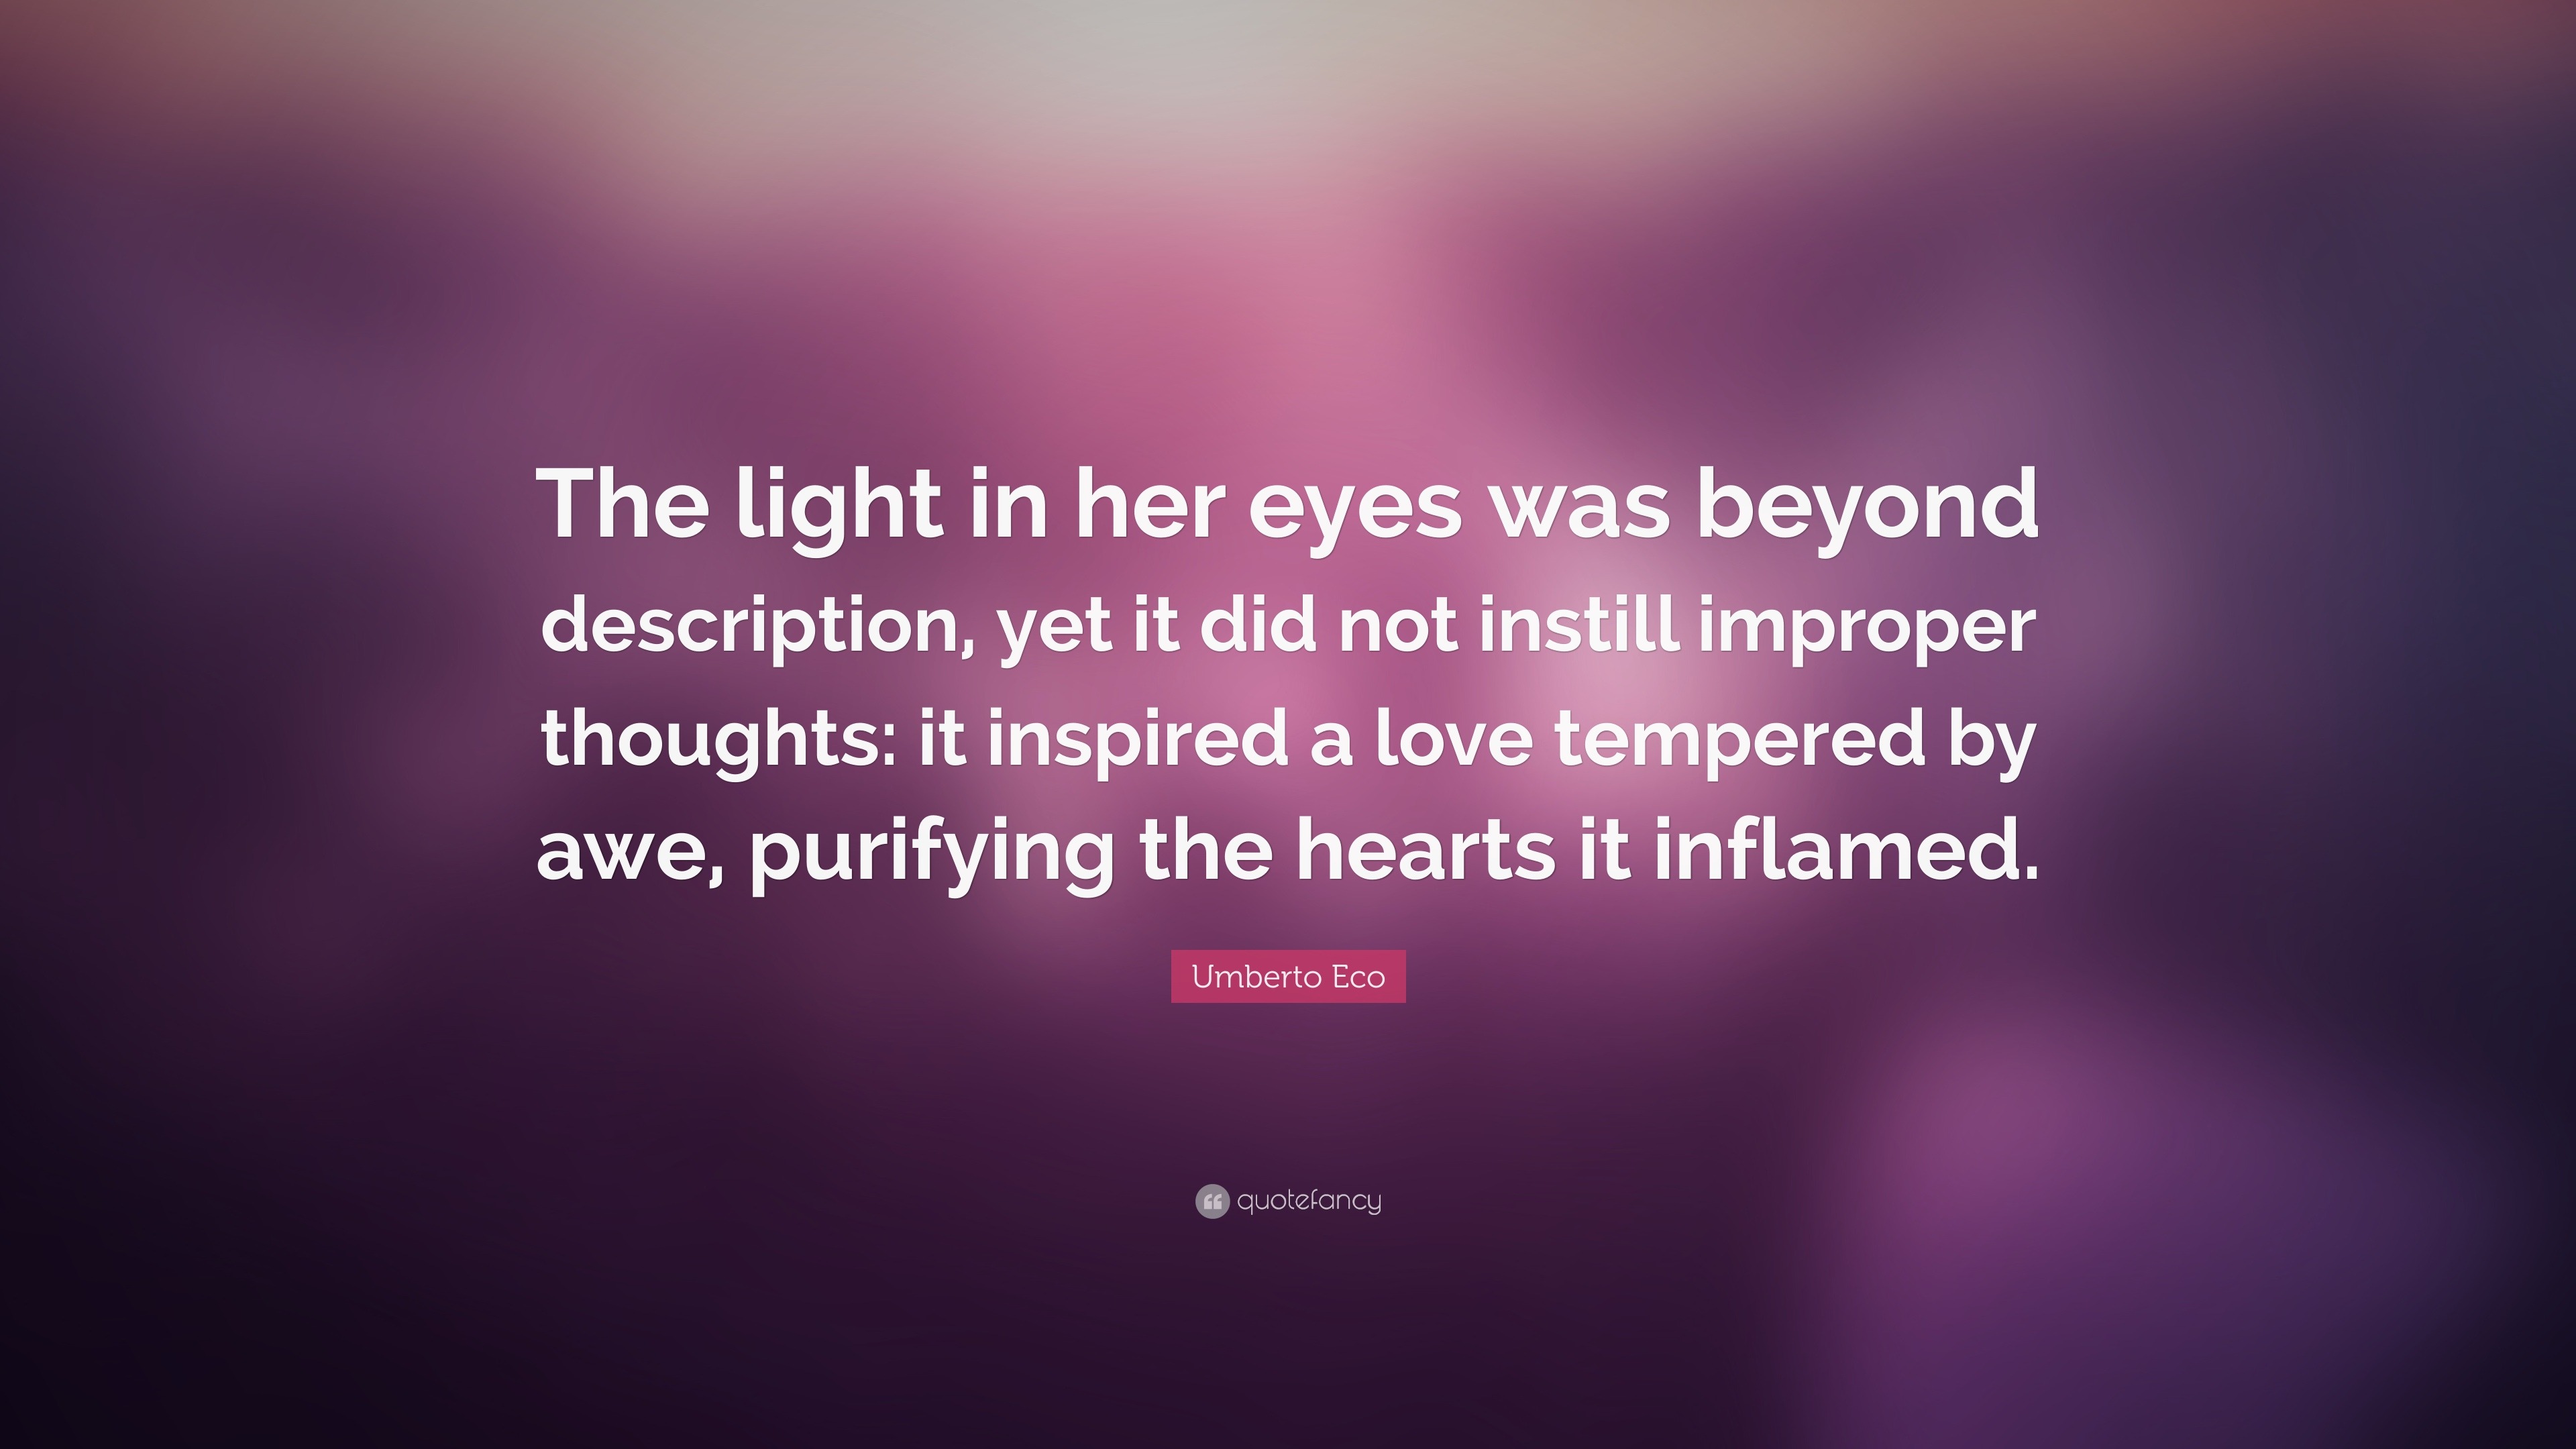 Umberto Eco Quote The Light In Her Eyes Was Beyond Description Yet It Did Not Instill Improper Thoughts It Inspired A Love Tempered By A